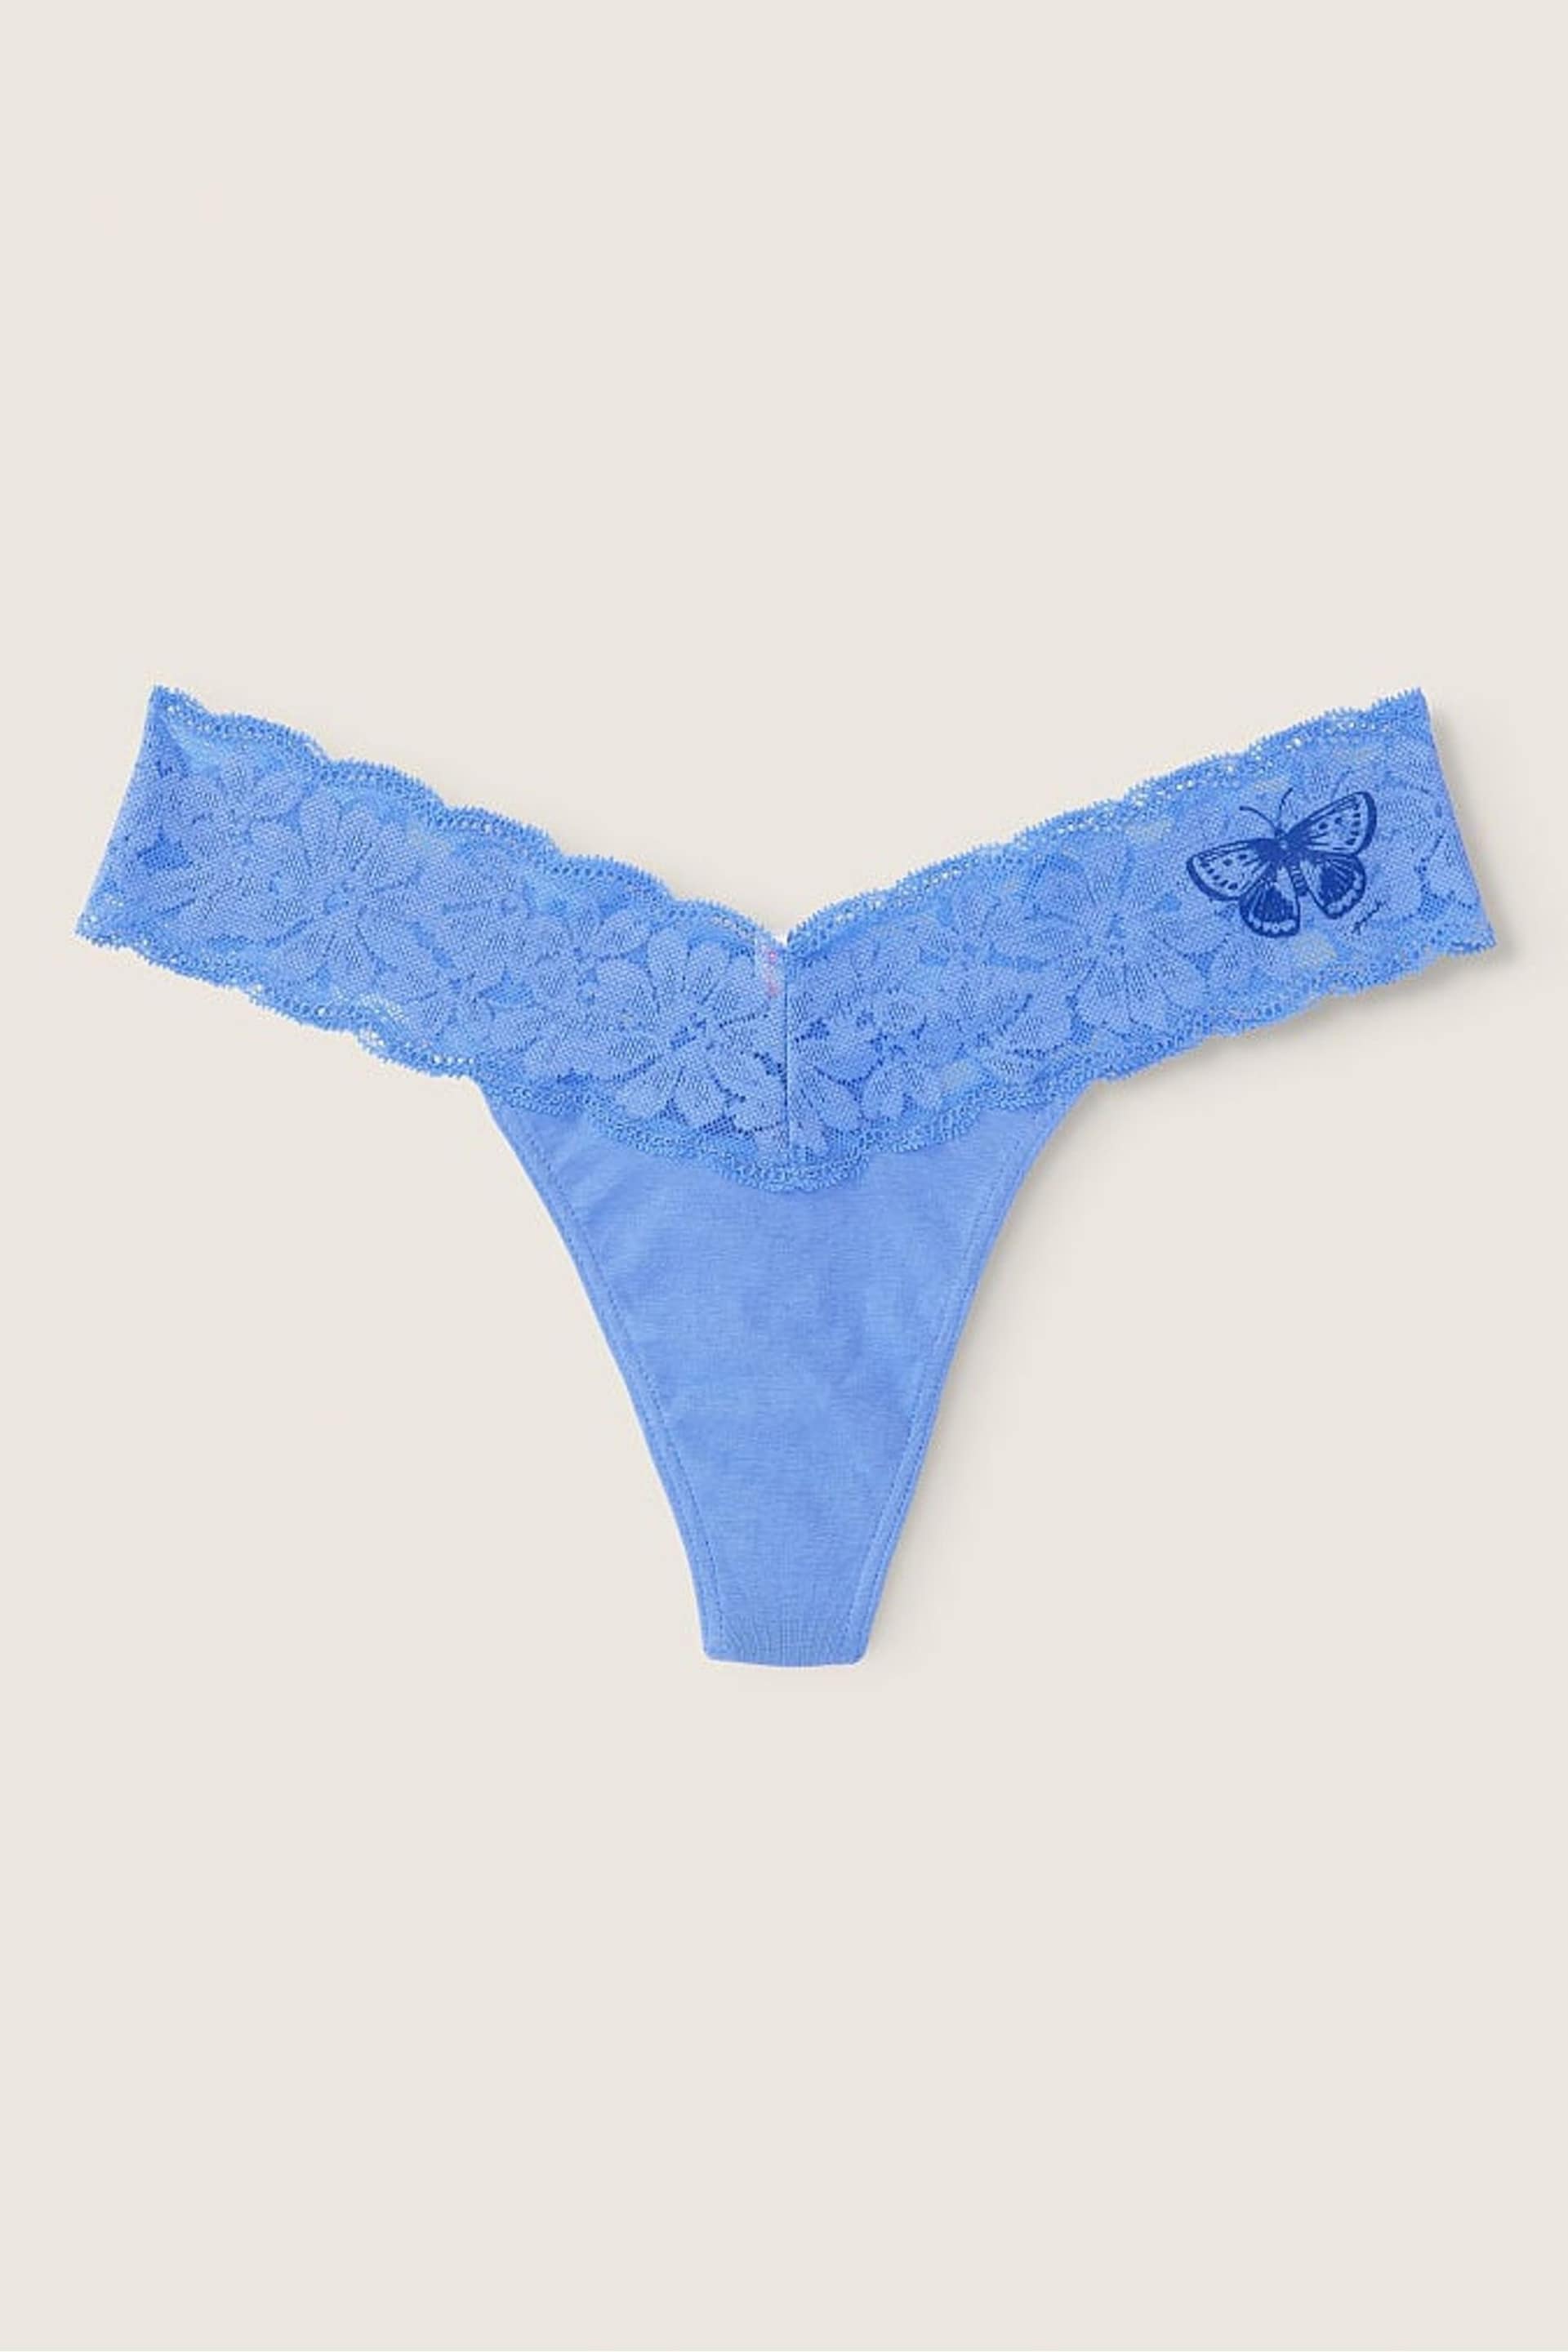 Victoria's Secret PINK Cornflower Blue With Graphic Band Everyday Lace Trim Thong Knickers - Image 1 of 2